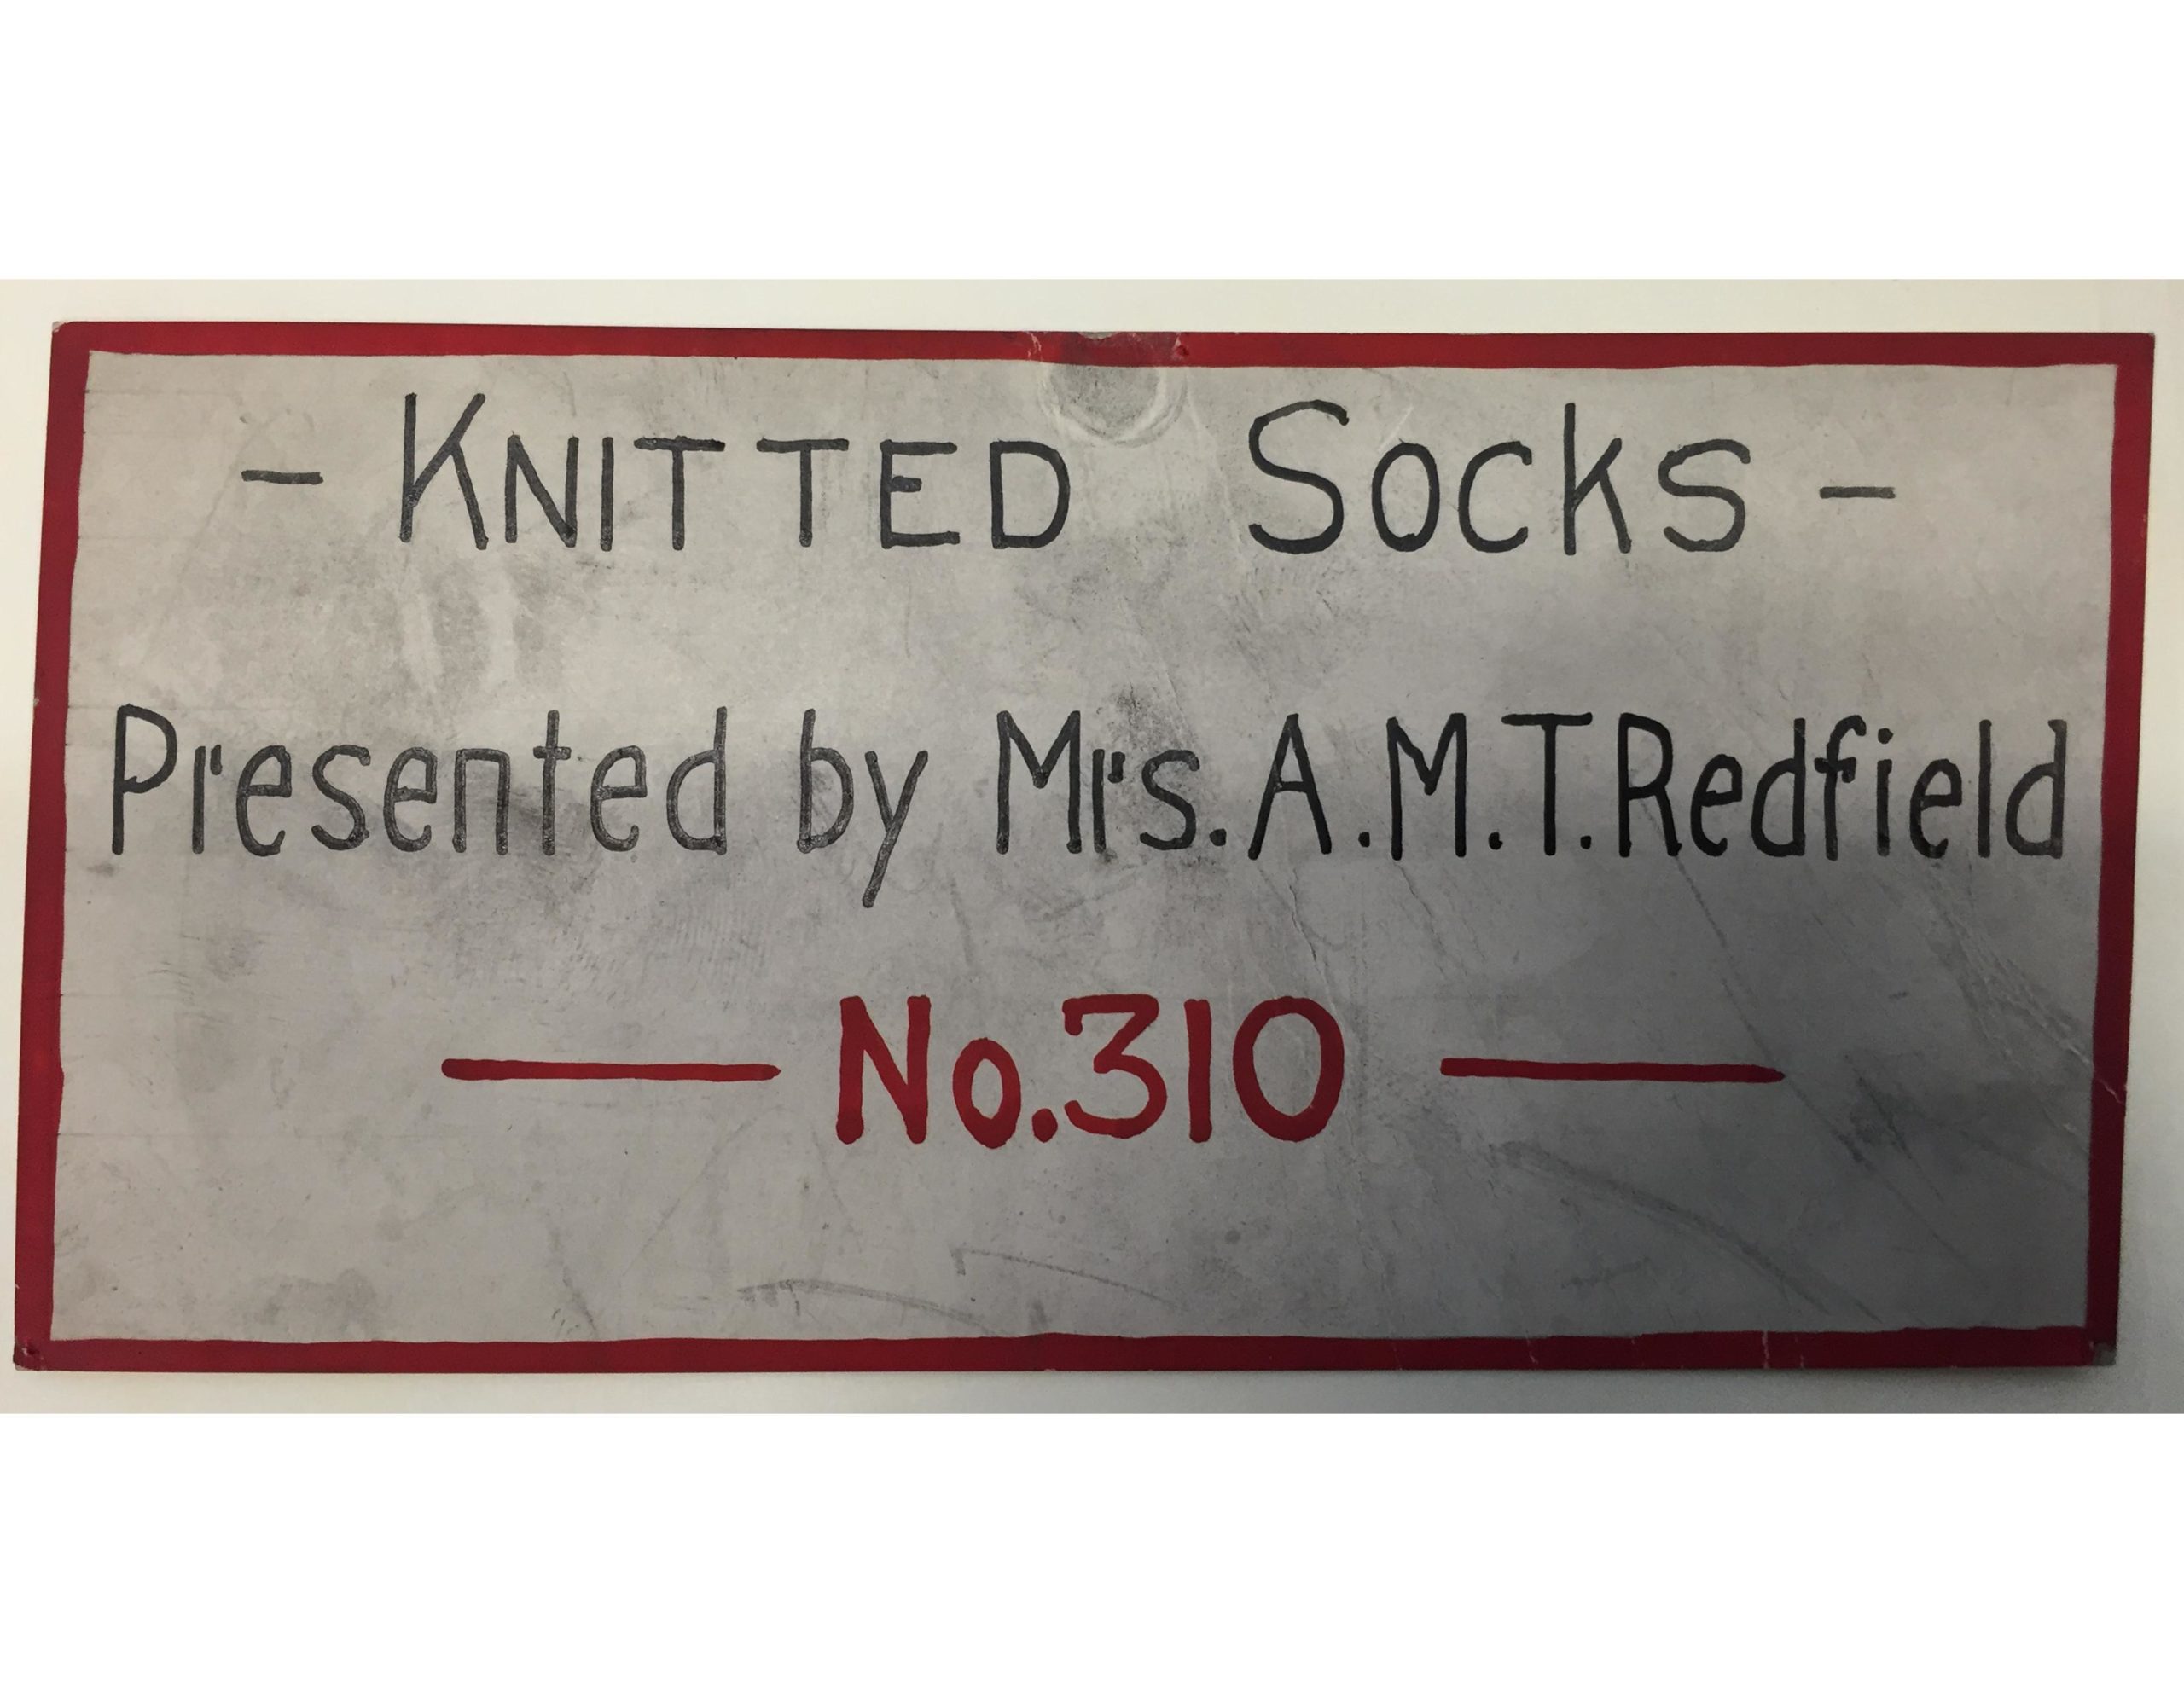 Knitted Socks Painting Label